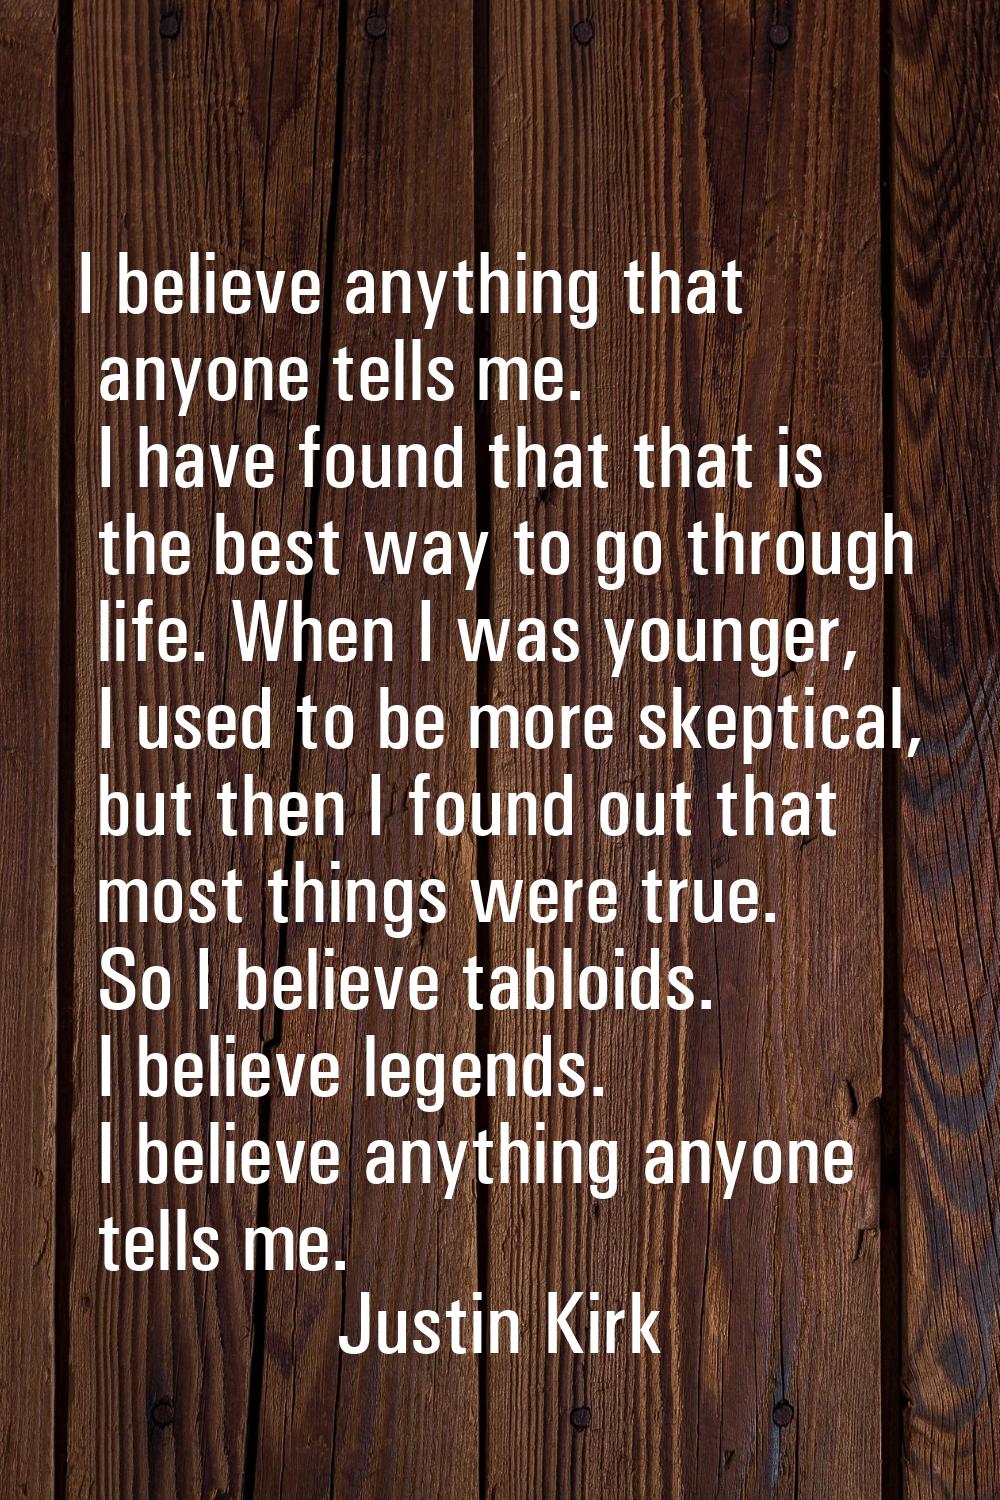 I believe anything that anyone tells me. I have found that that is the best way to go through life.